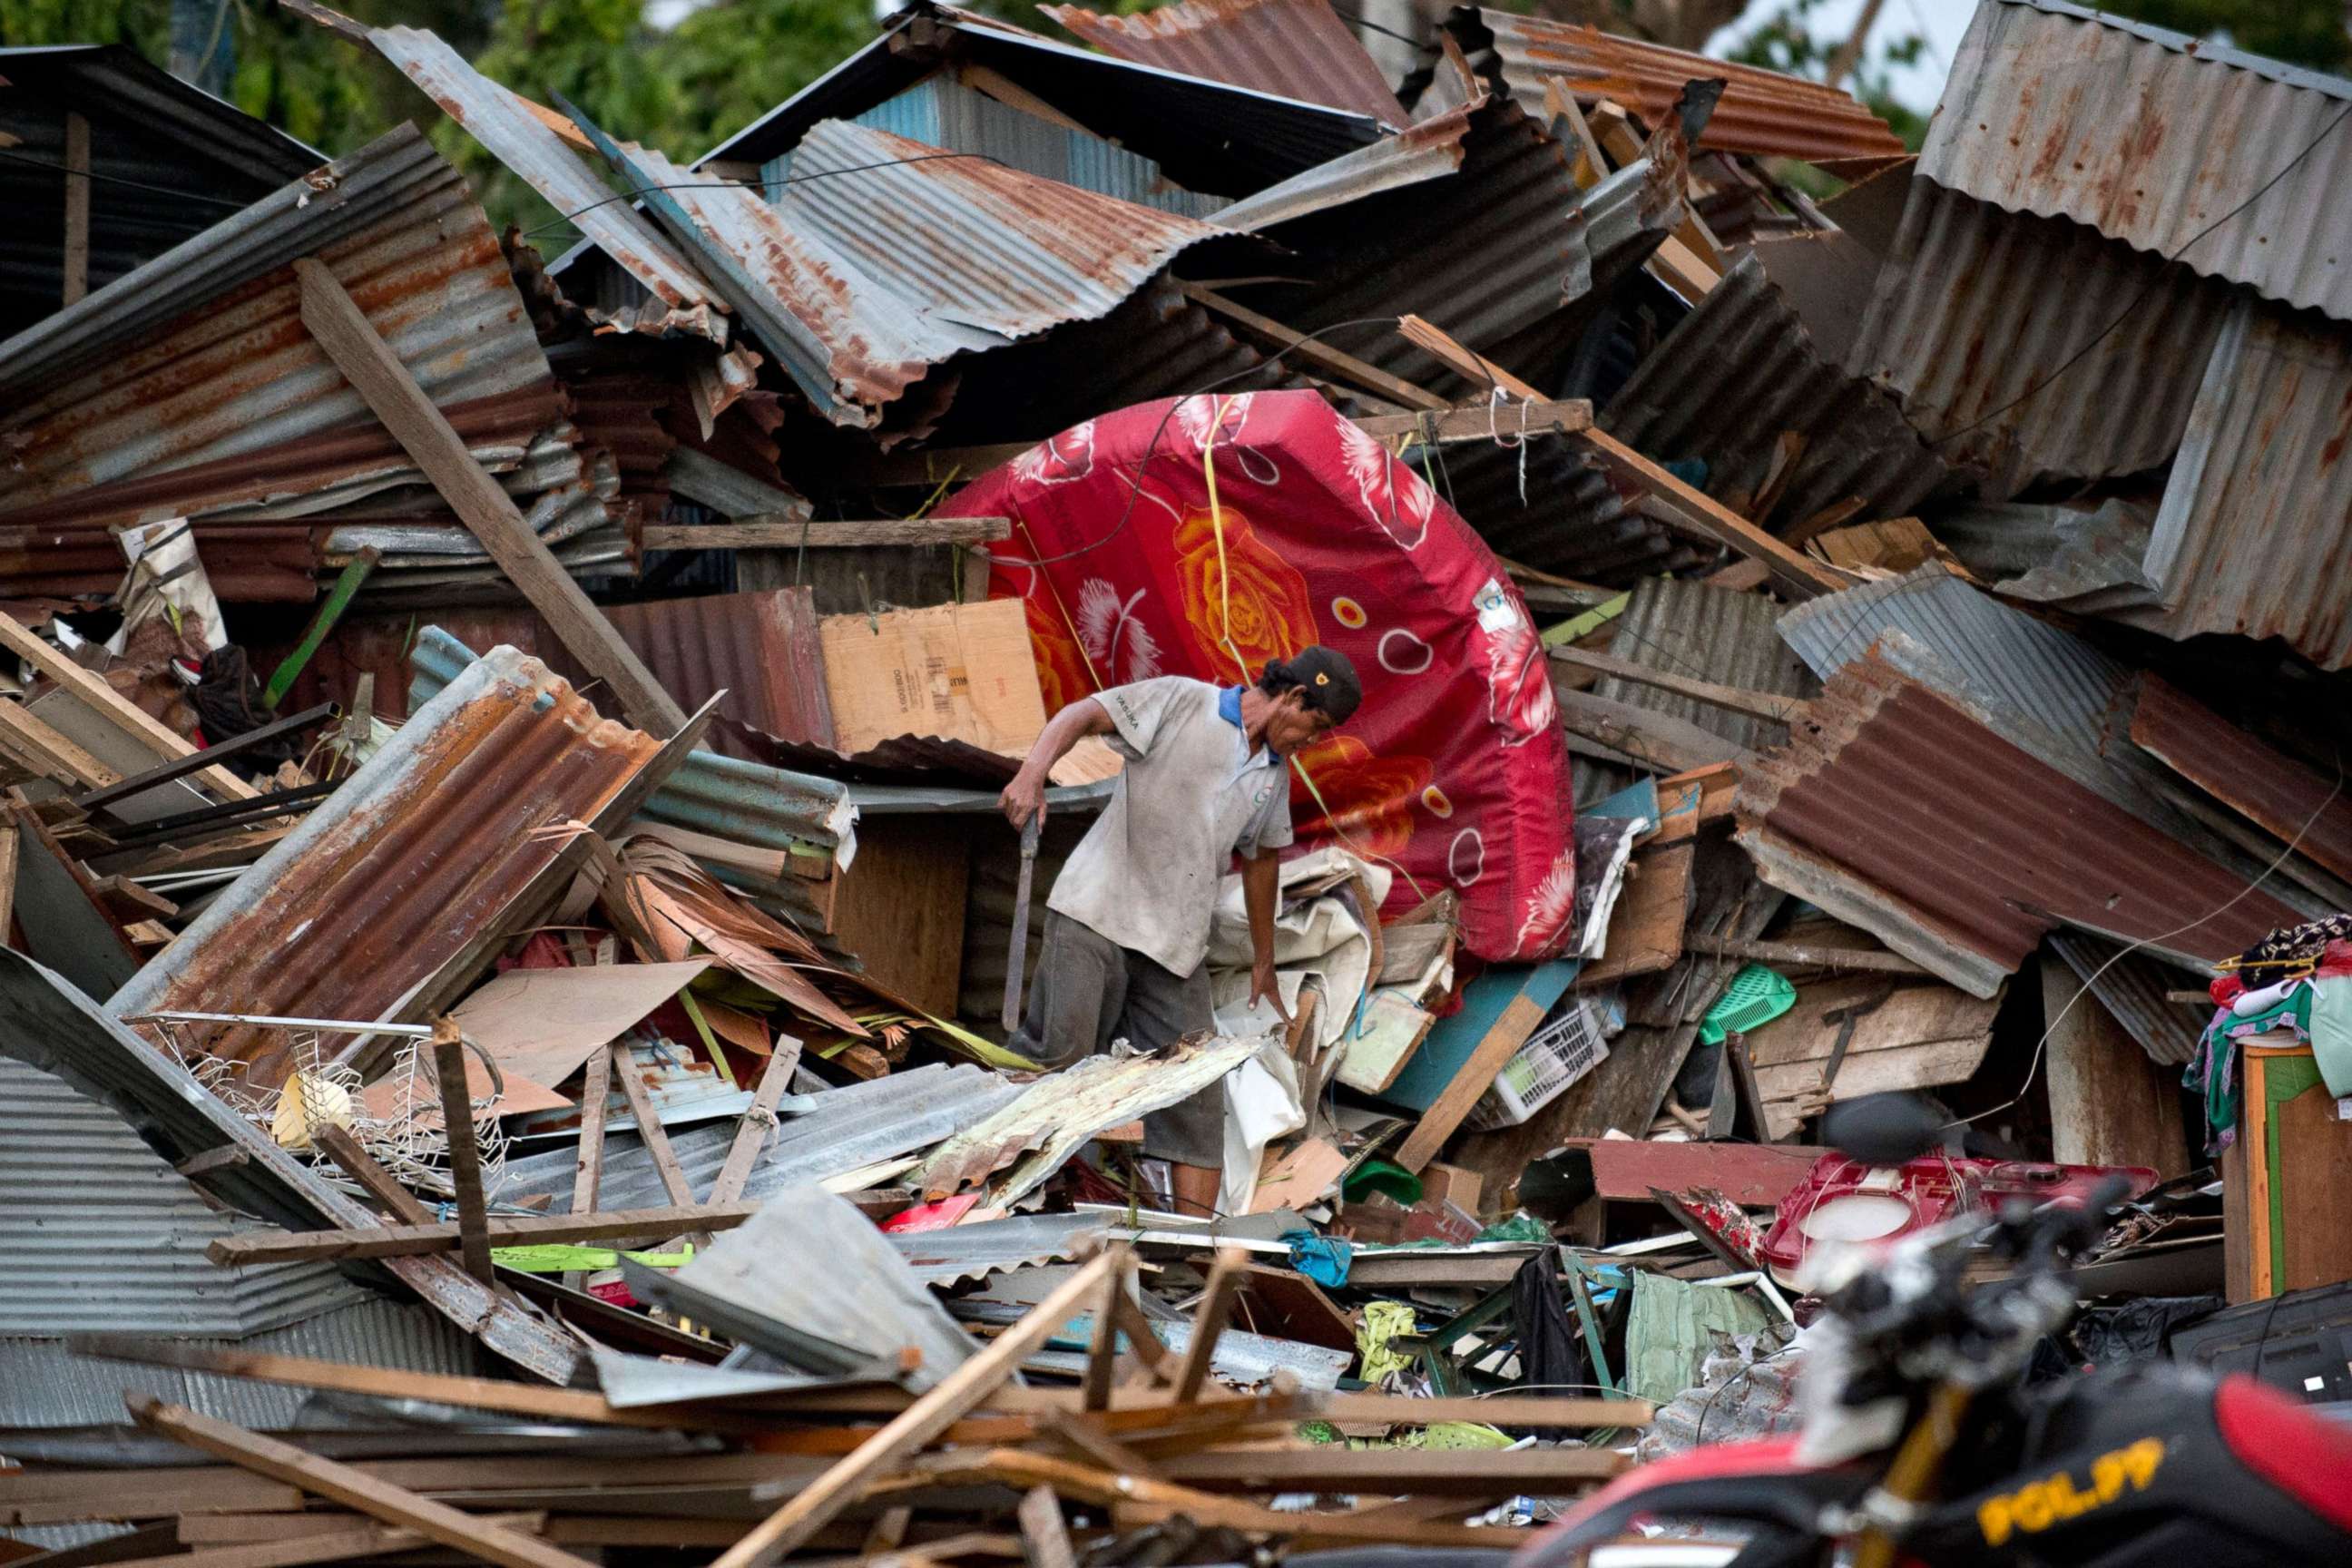 PHOTO: A man looks for his belongings amid the debris of his destroyed house in Palu in Central Sulawesi on September 29, 2018, after a strong earthquake and tsunami struck the area.